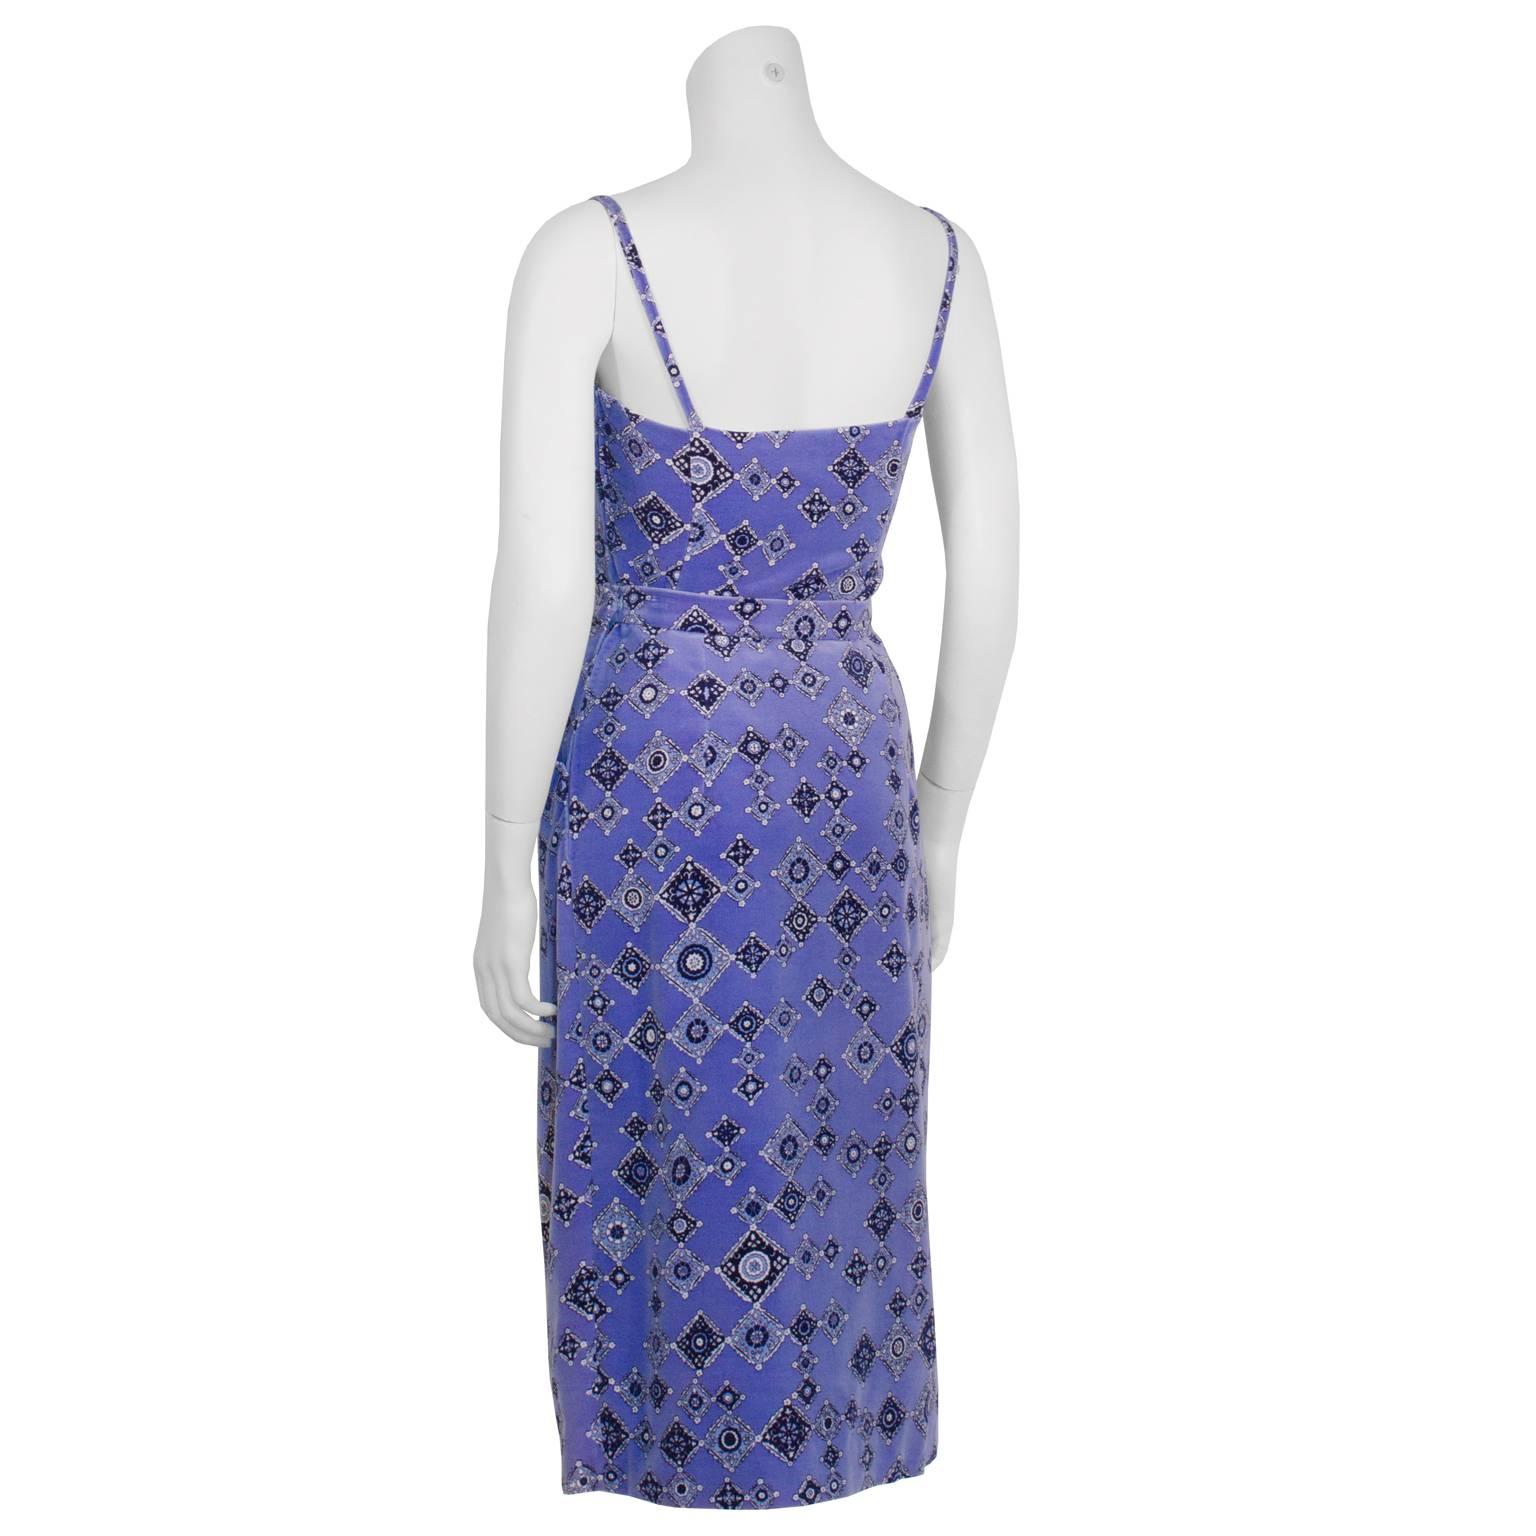 Amazing 1970's Emilio Pucci periwinkle velvet ensemble featuring a corset style top and straight cut skirt. Top has two small slits and a side zip closure. Skirt features fixed pleats and a side zip closure. The lovely pattern has notes of white,